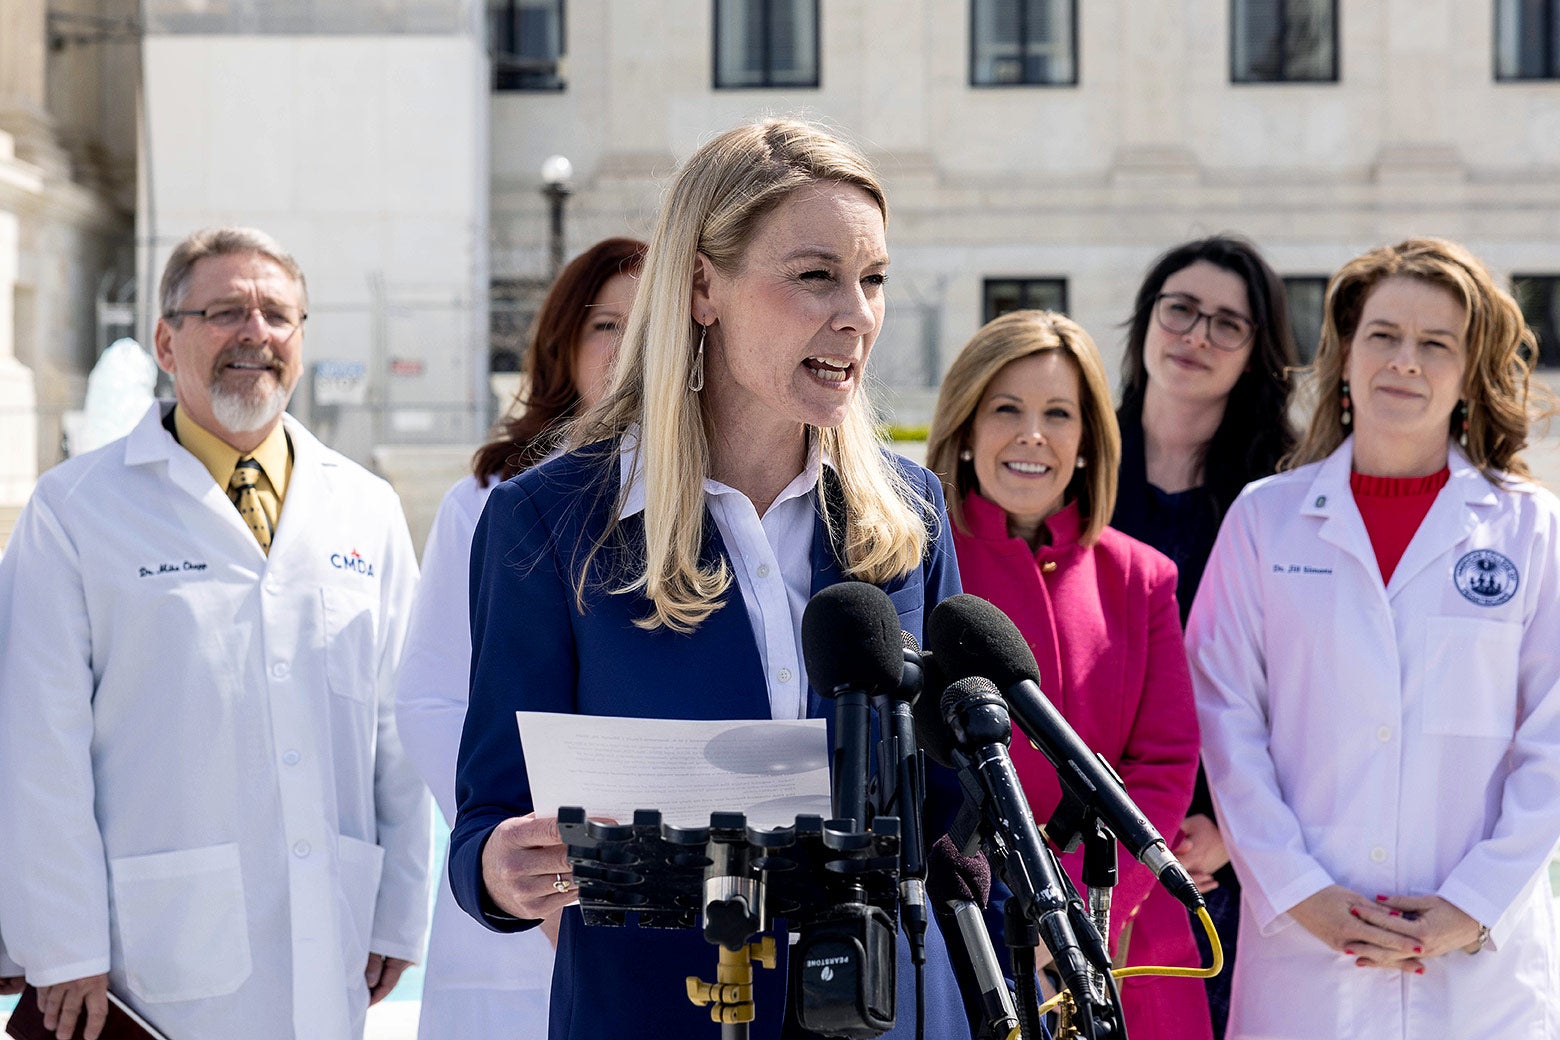 Hawley reads from a piece of paper at a lectern with doctors in lab coats behind her.